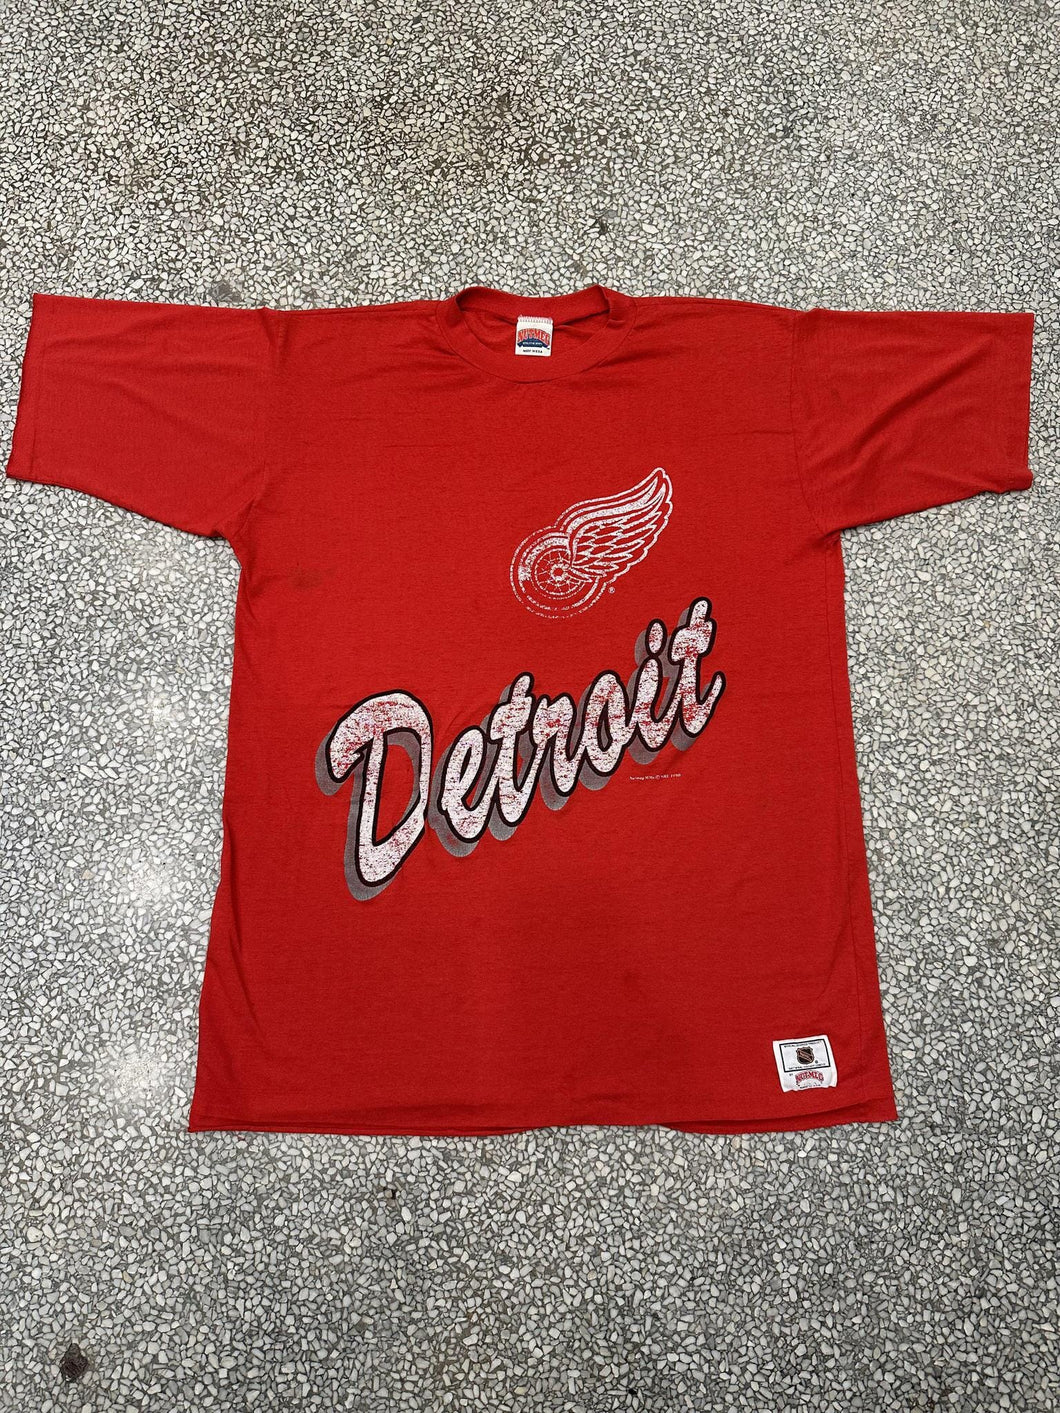 Detroit Red Wings Vintage 1990 Nutmeg Mills One Size Tee Paper Thin Faded Red ABC Vintage 